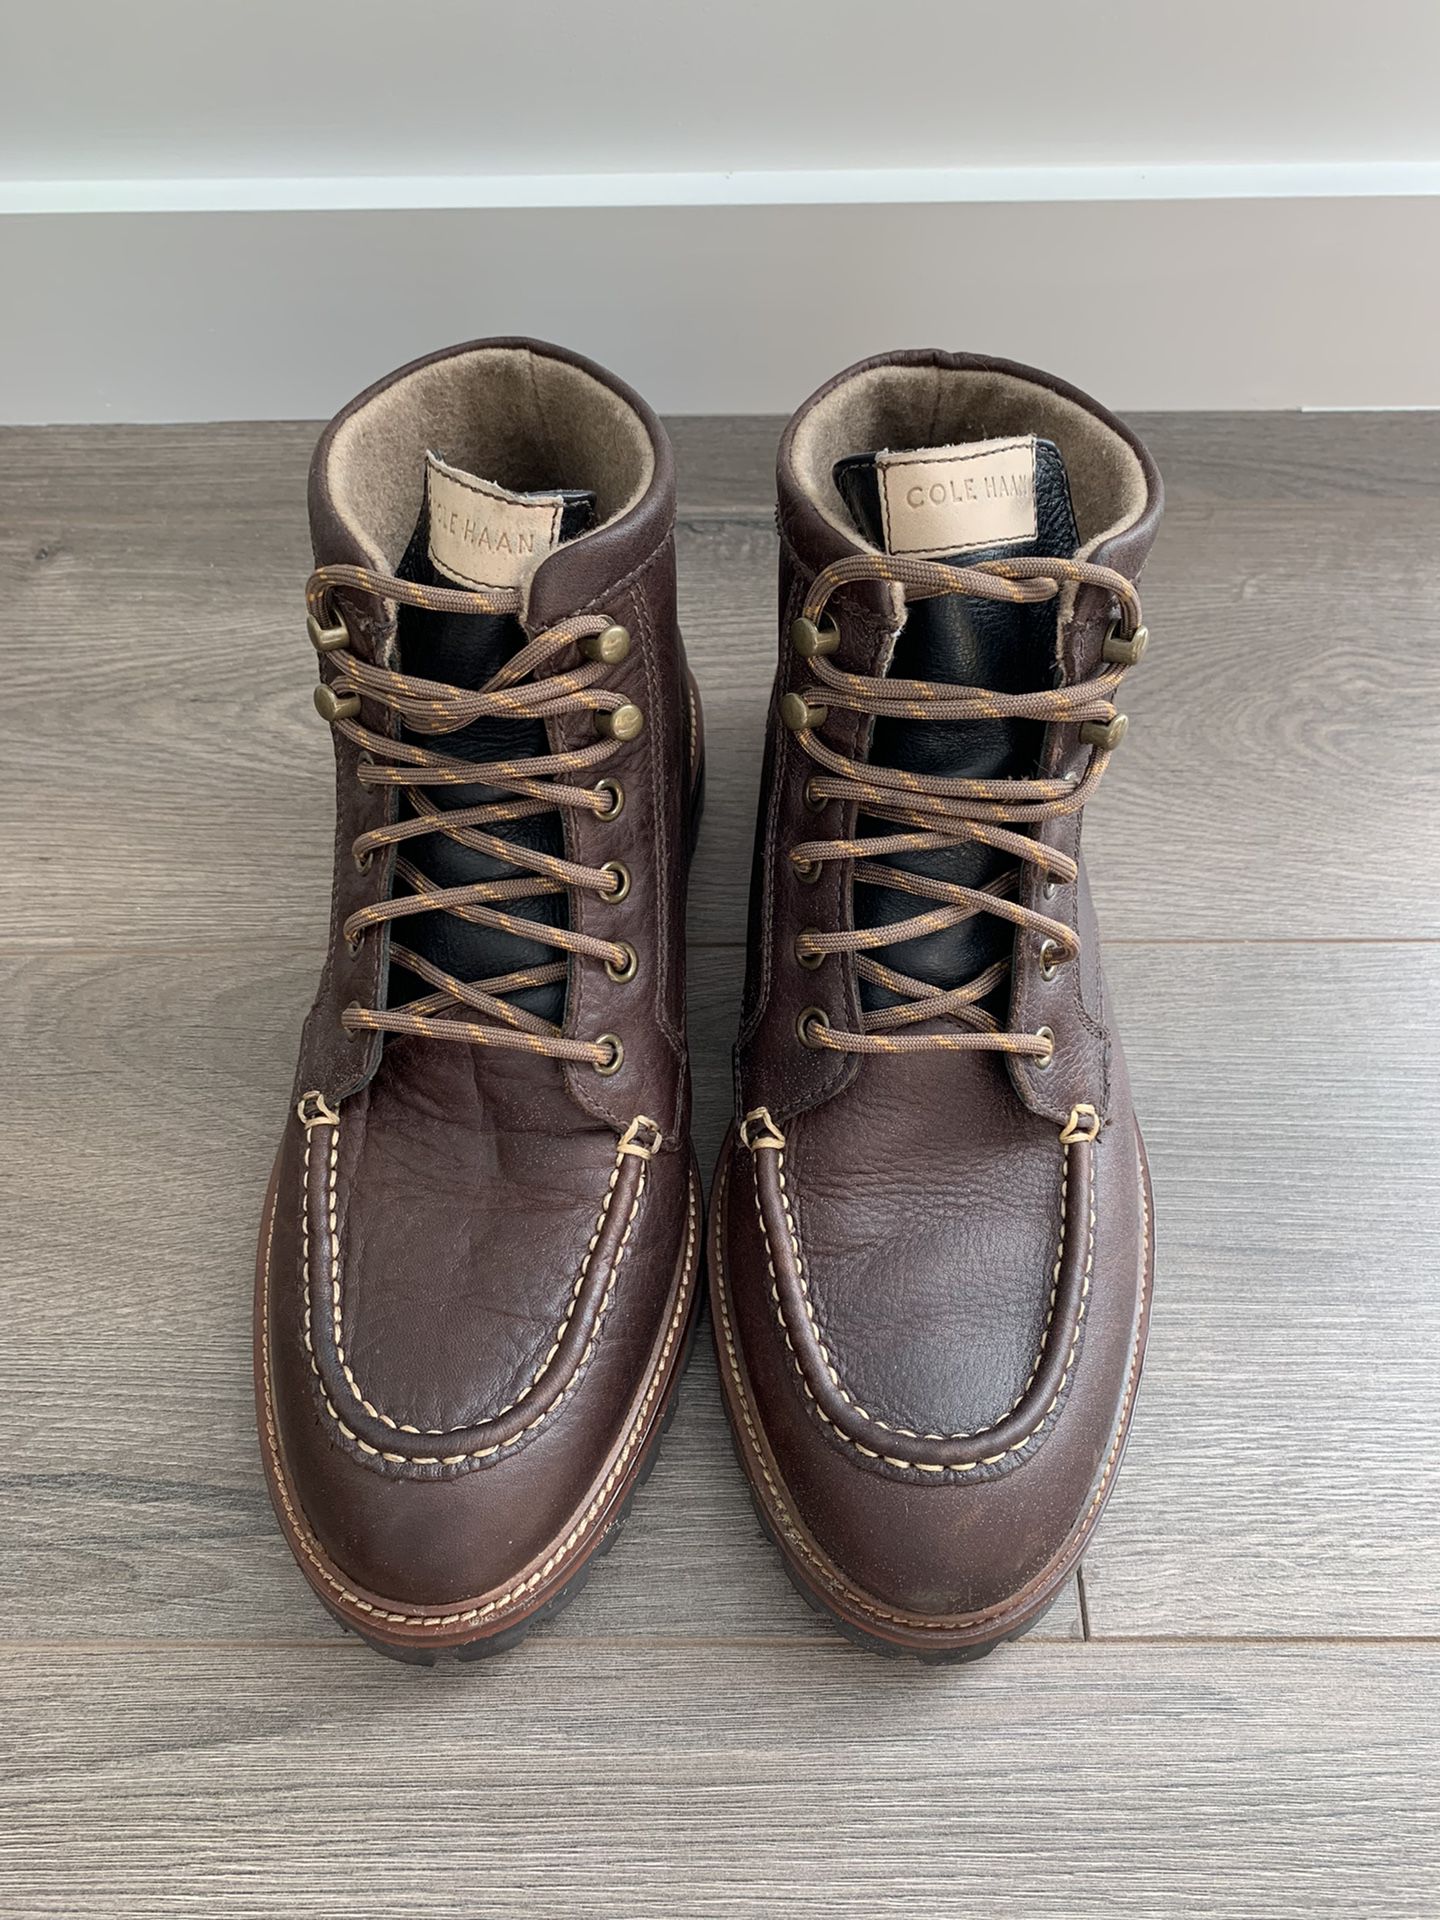 Cole Haan Judson Boot, brown, water-resistant, 8M